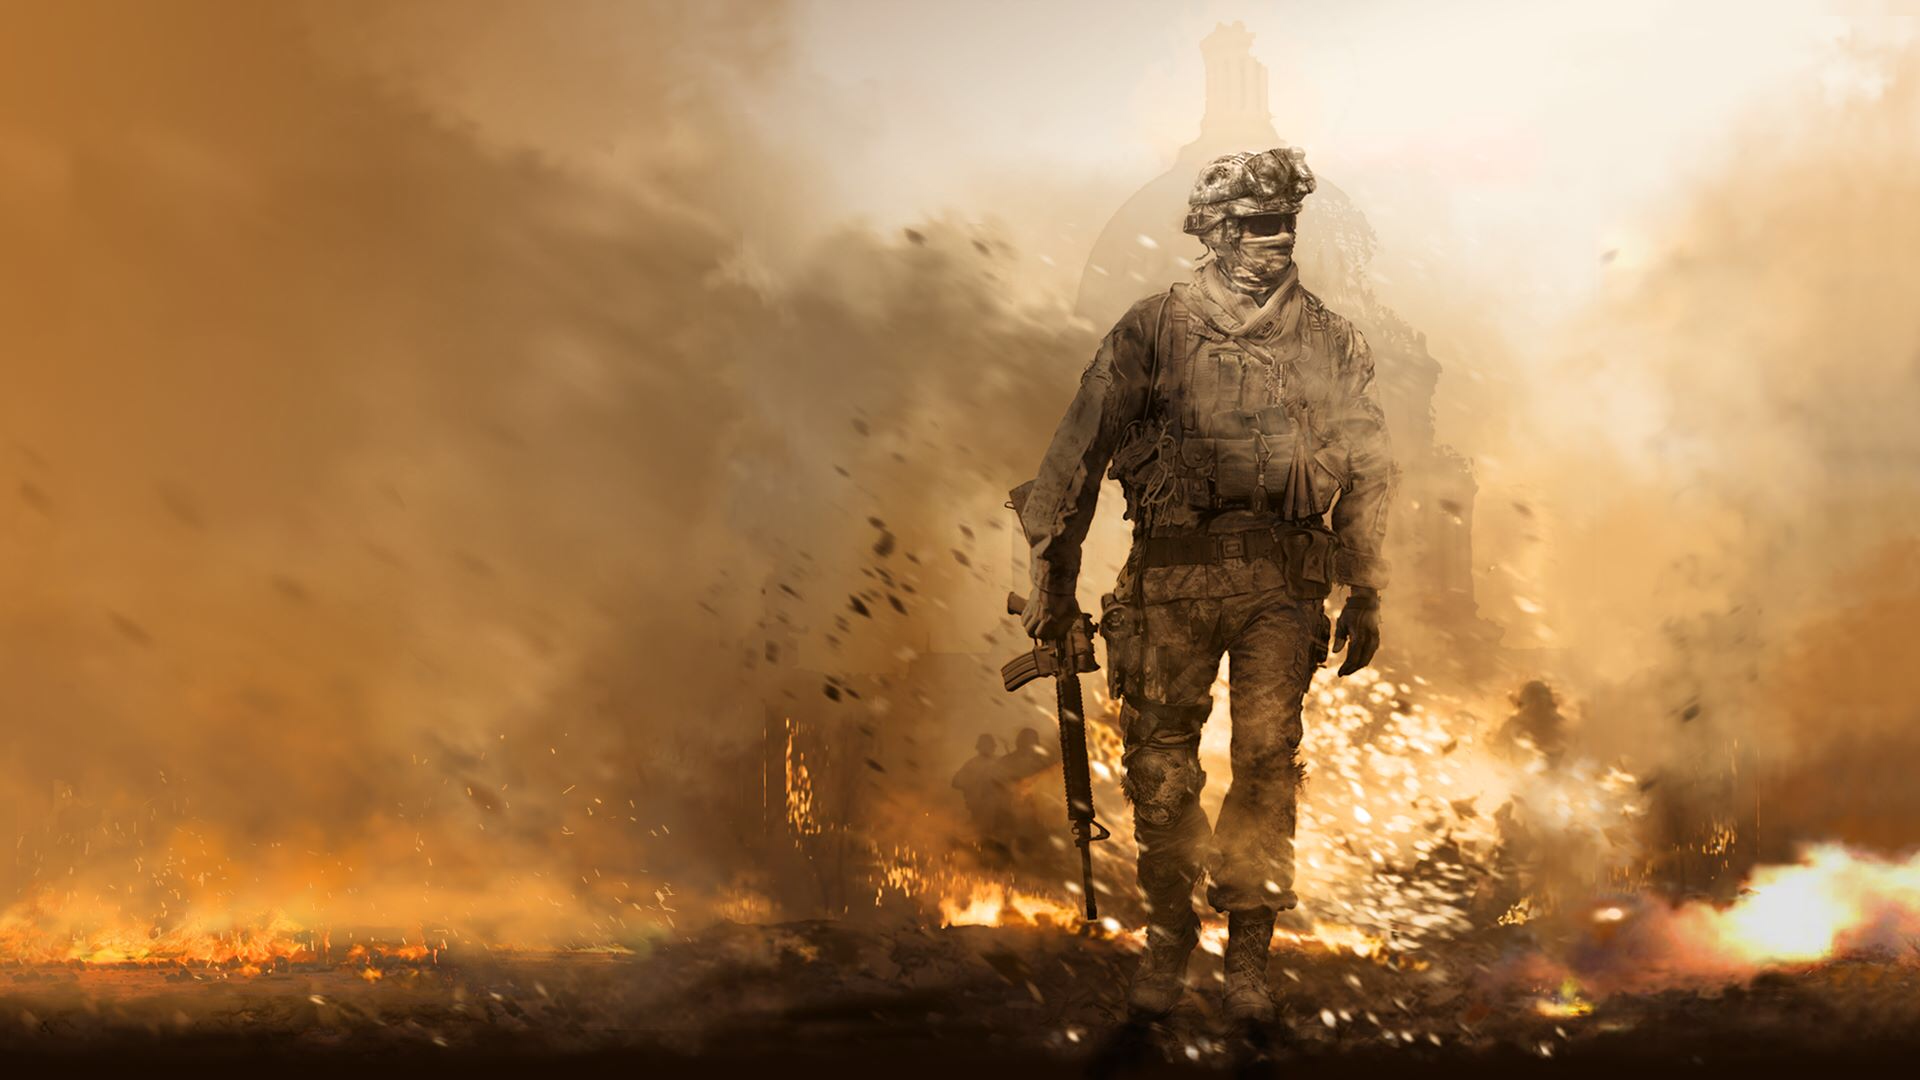 Leaked Artwork Suggests Upcoming Modern Warfare 2 Is Coming To Steam